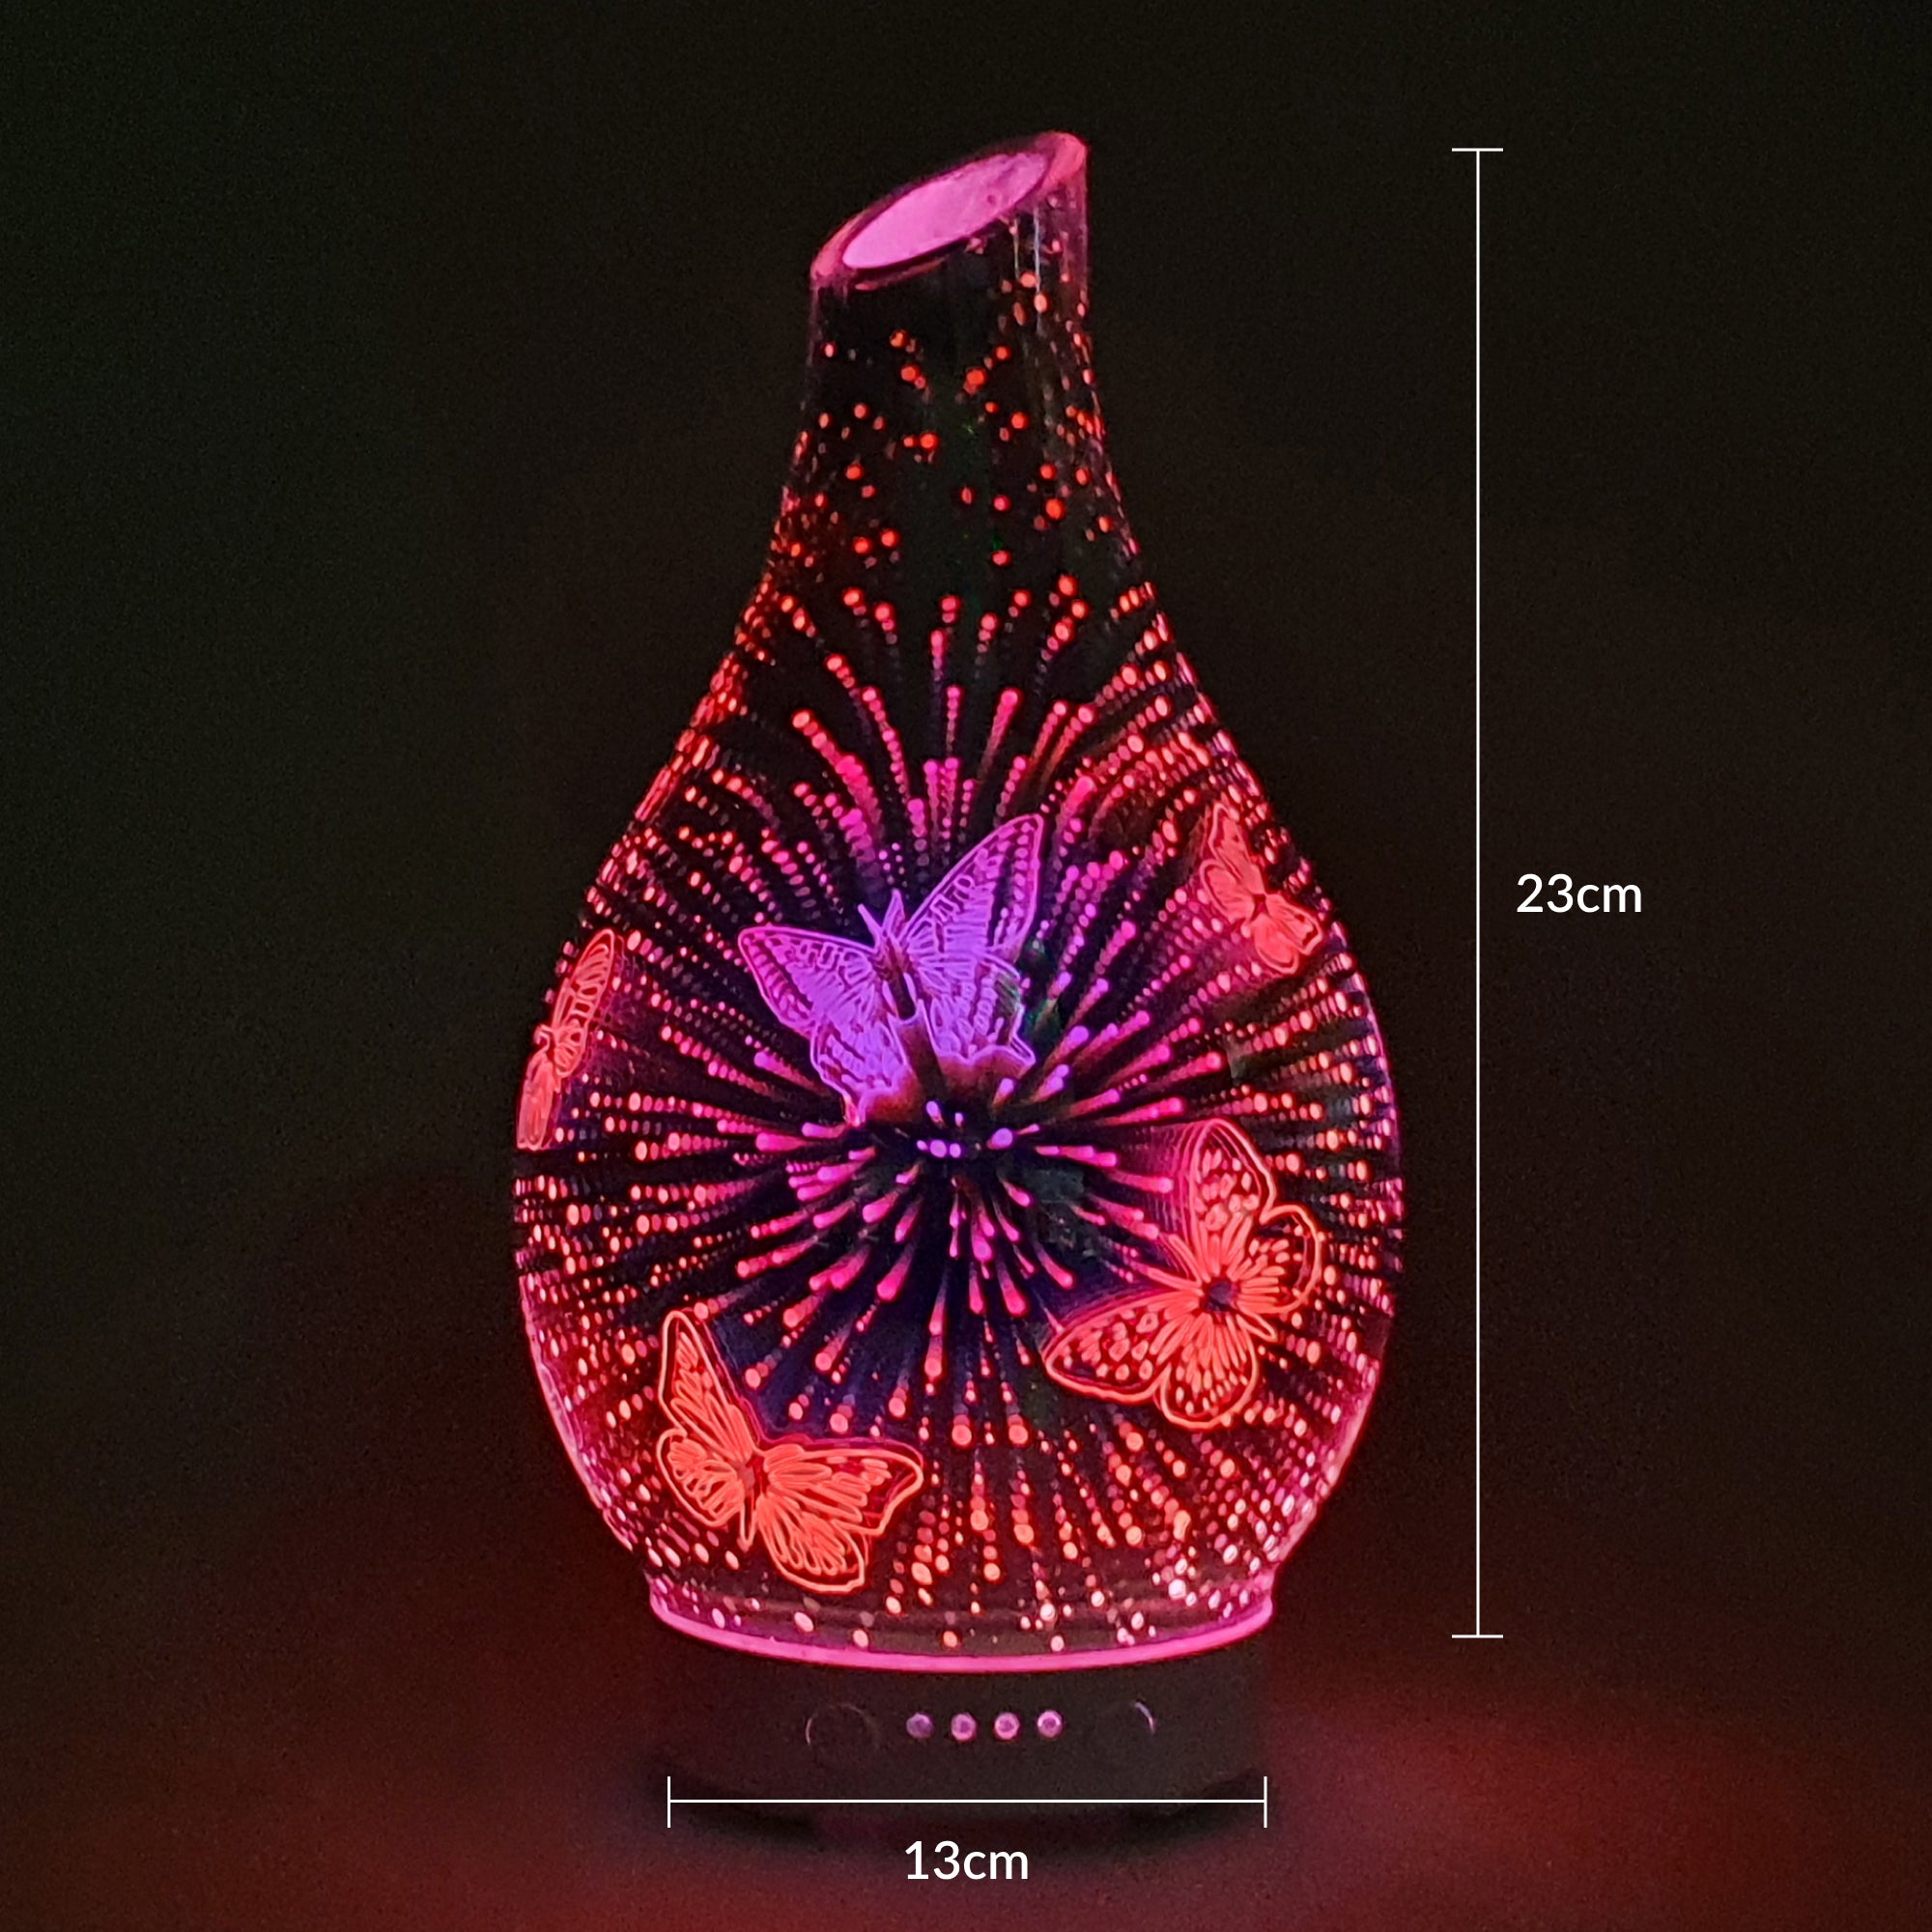 Cello - 3D Ultrasonic Diffuser - Butterfly